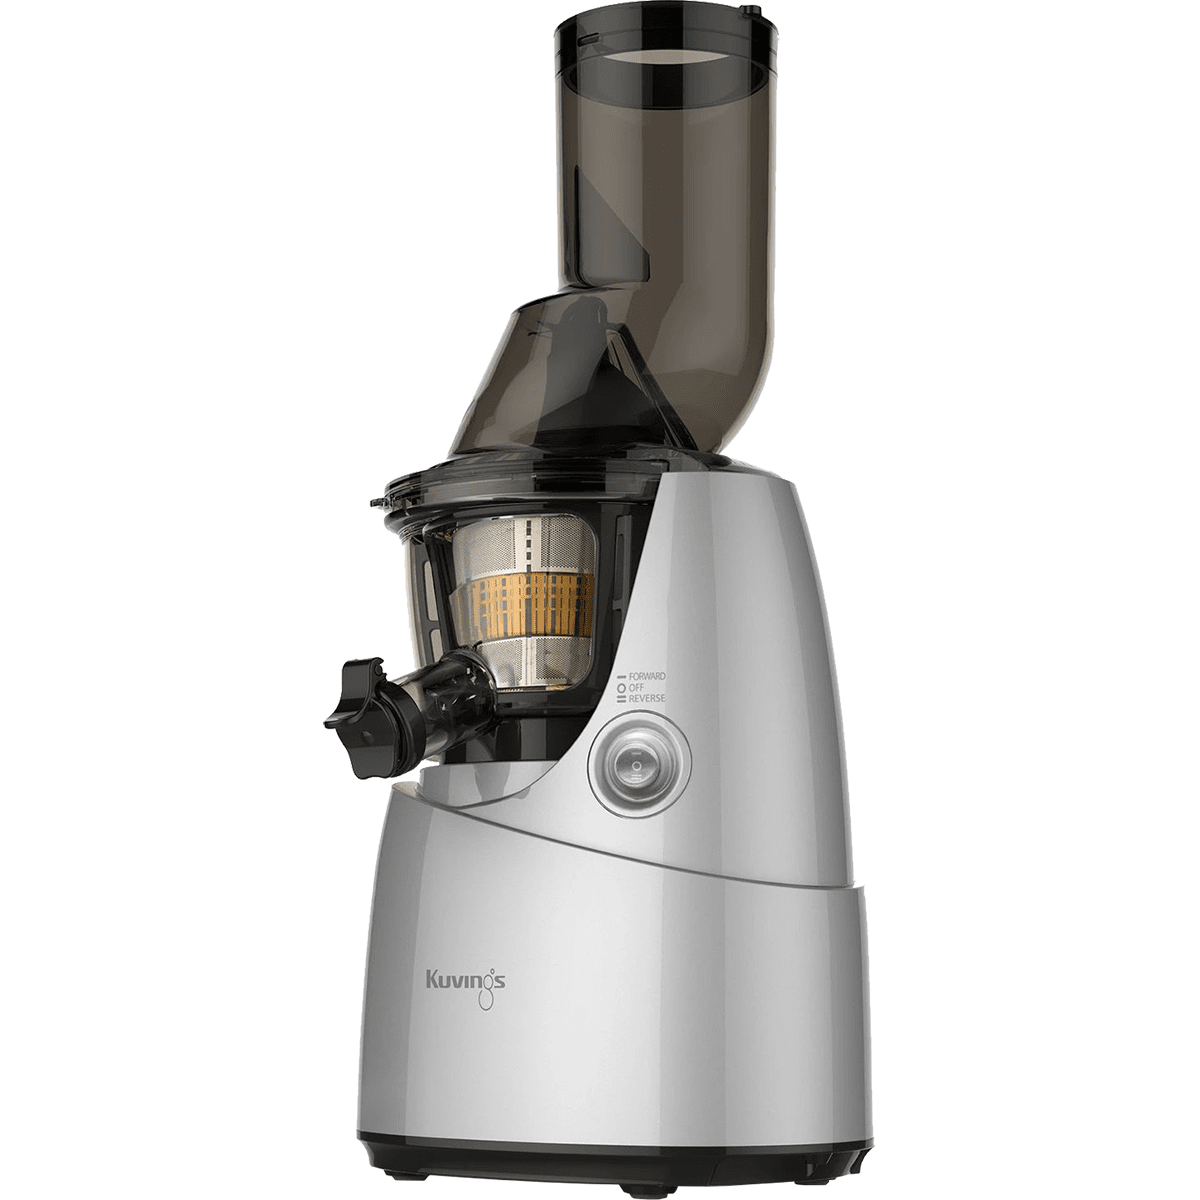 Kuvings B6000 Whole Slow Juicer - Silver Pearl